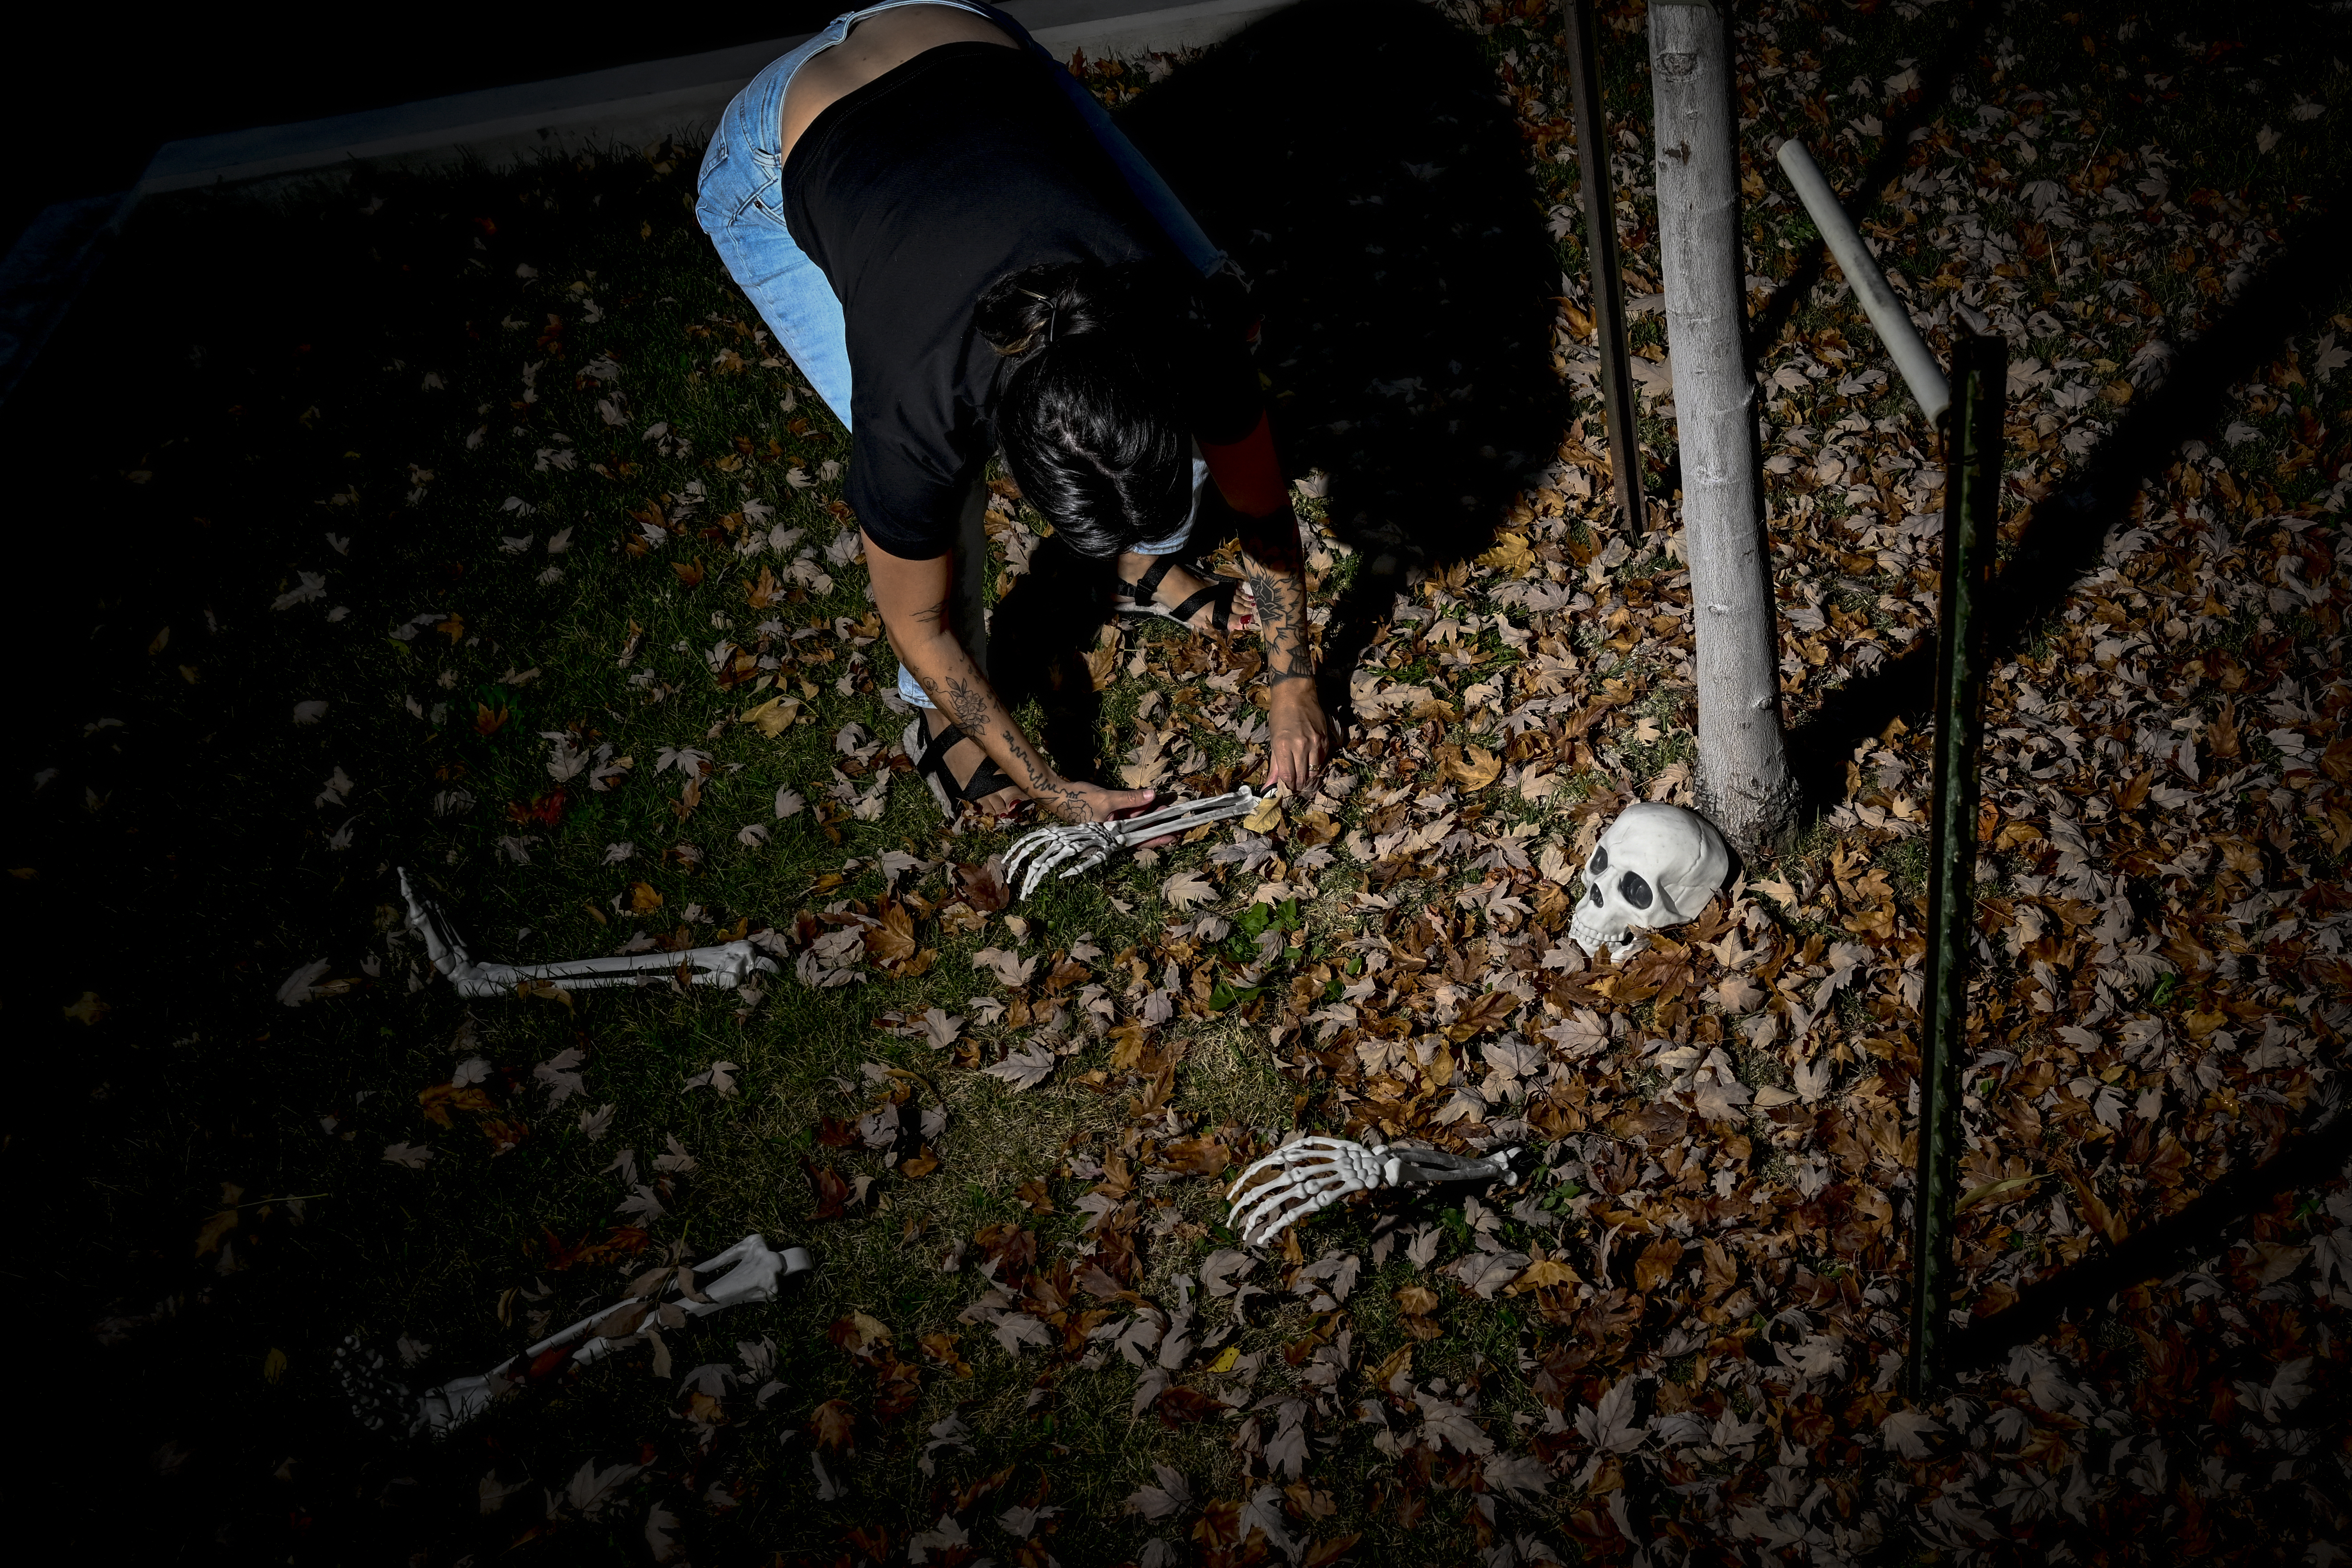 Erin Moriarty-Siler digs a leafy grave for an unnamed skeleton at her home in Denver on Wednesday, October 25, 2023. Erin received a large decorative skeleton named Fred the Dead as an anniversary gift from her husband, which she said brought her to tears. (Photo by AAron Ontiveroz/The Denver Post)